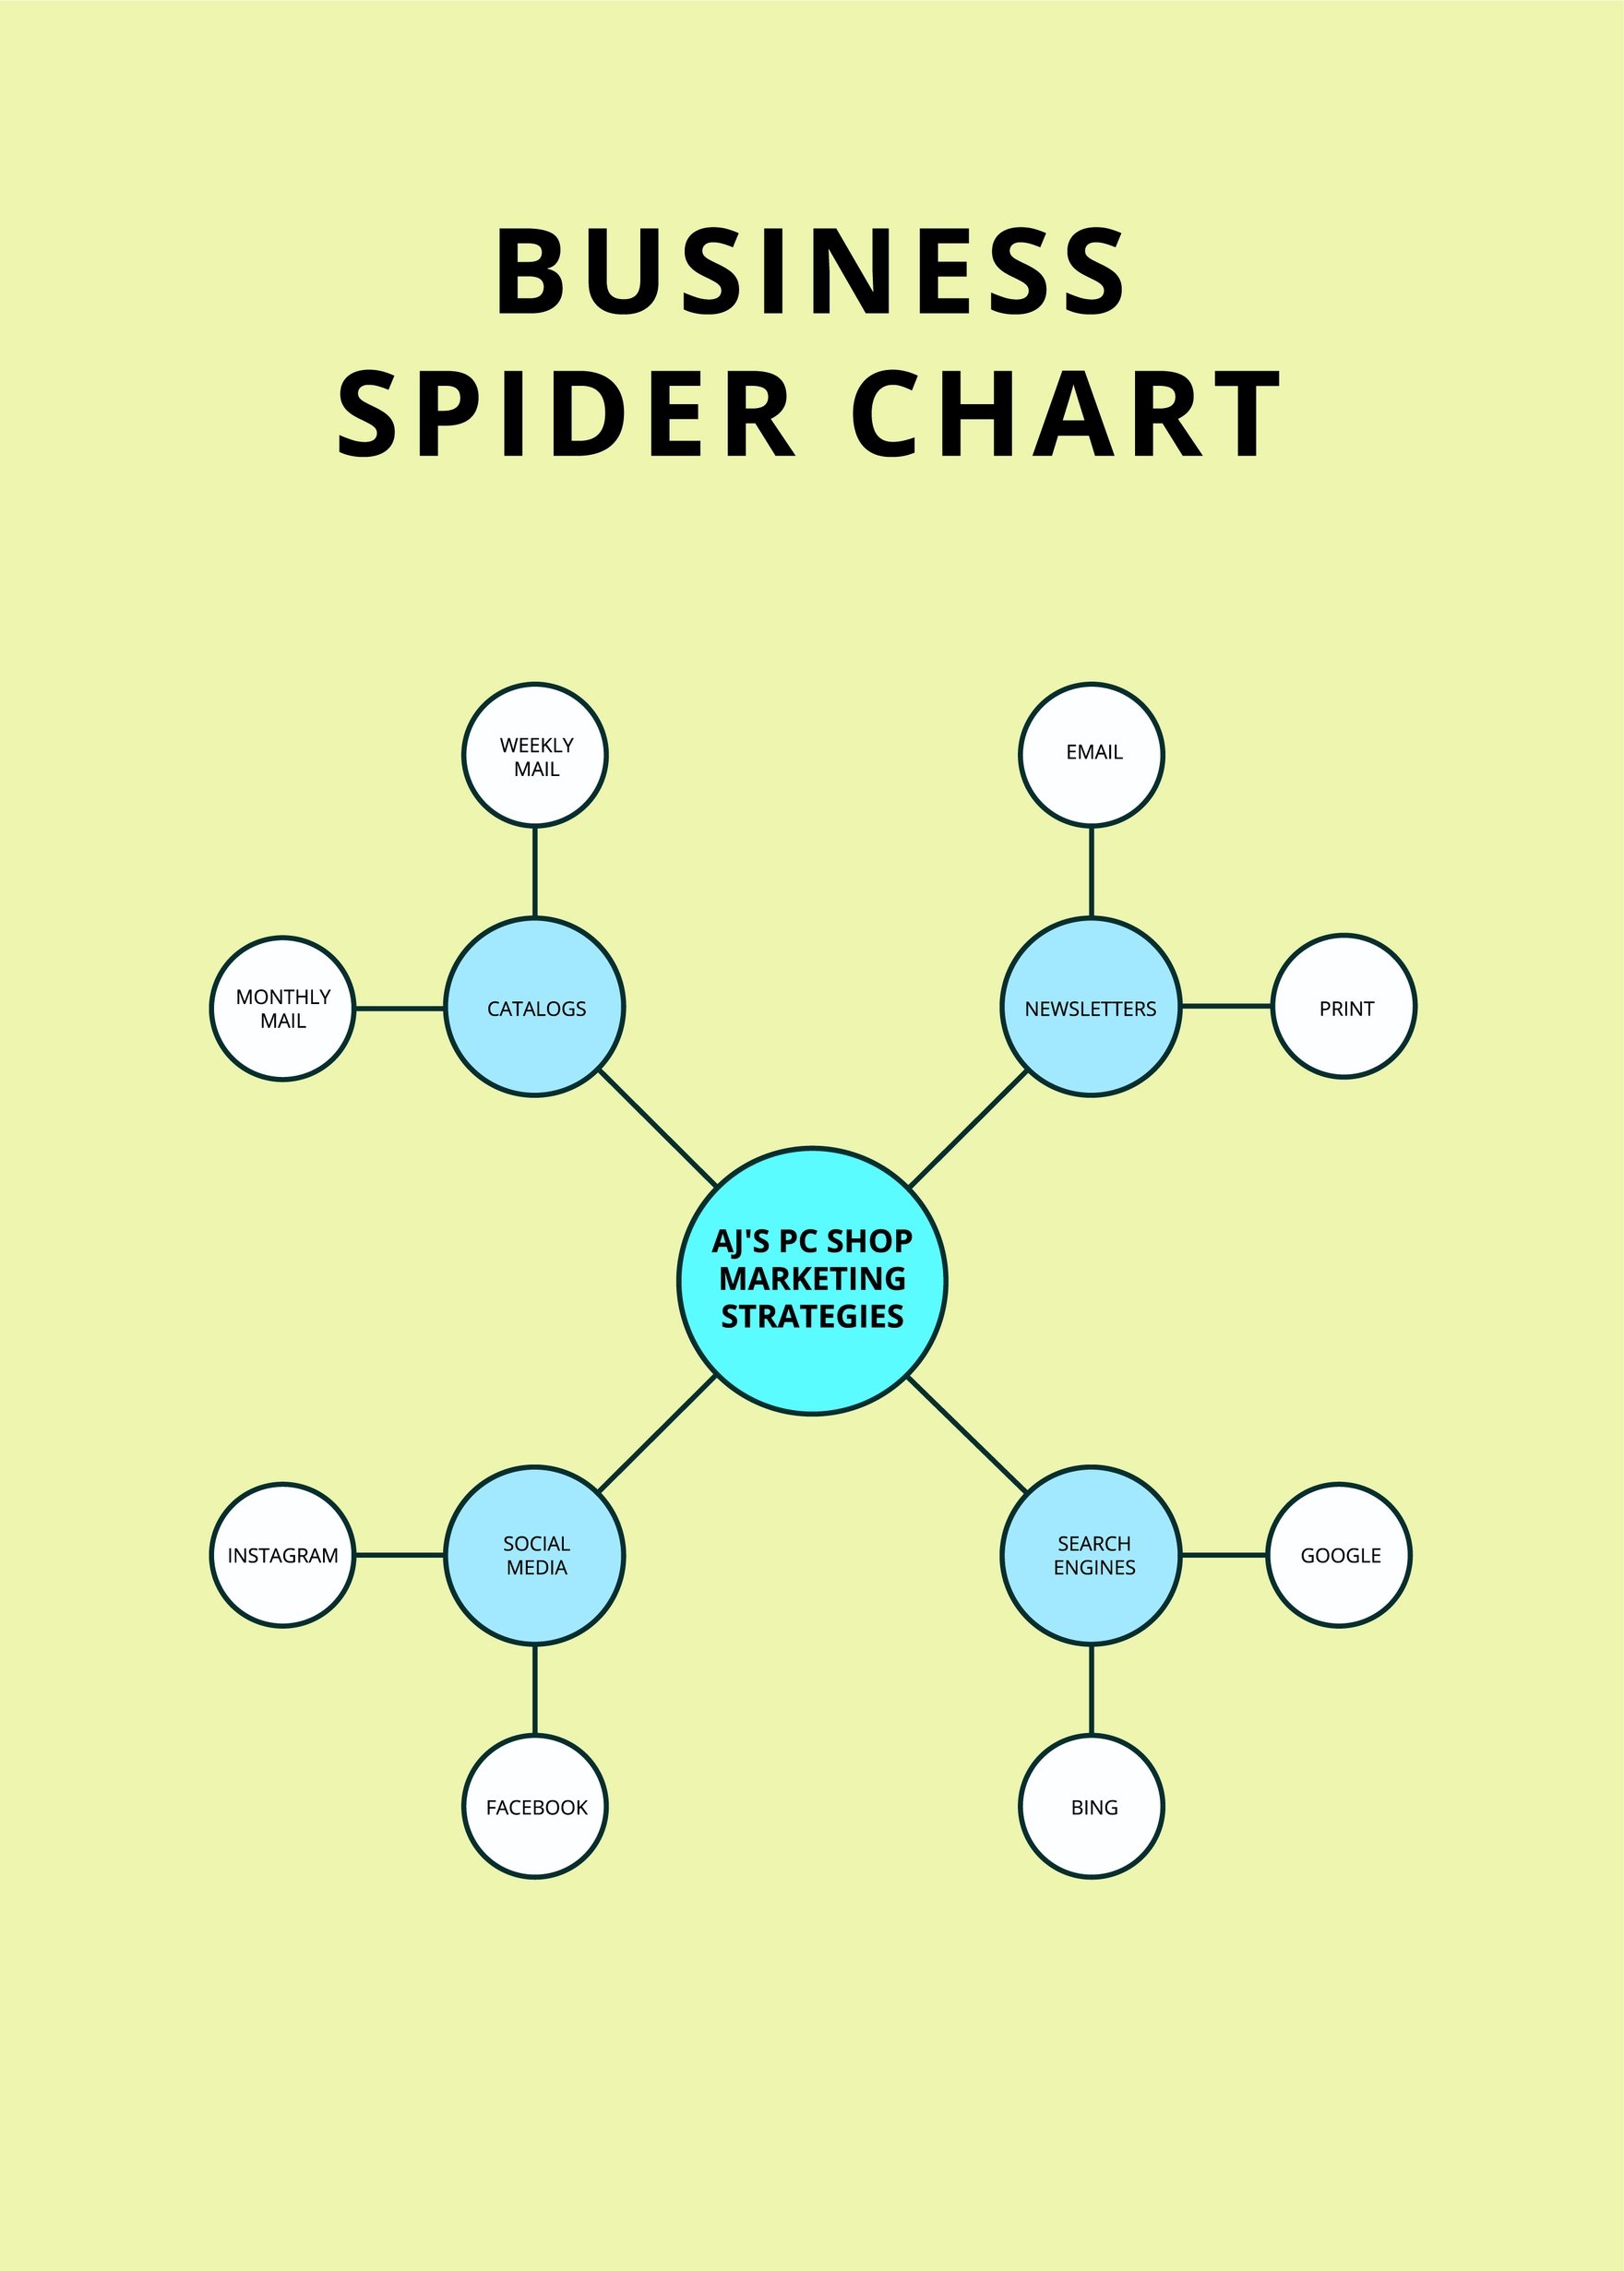 FREE Spider Chart Template Download in PDF, Illustrator